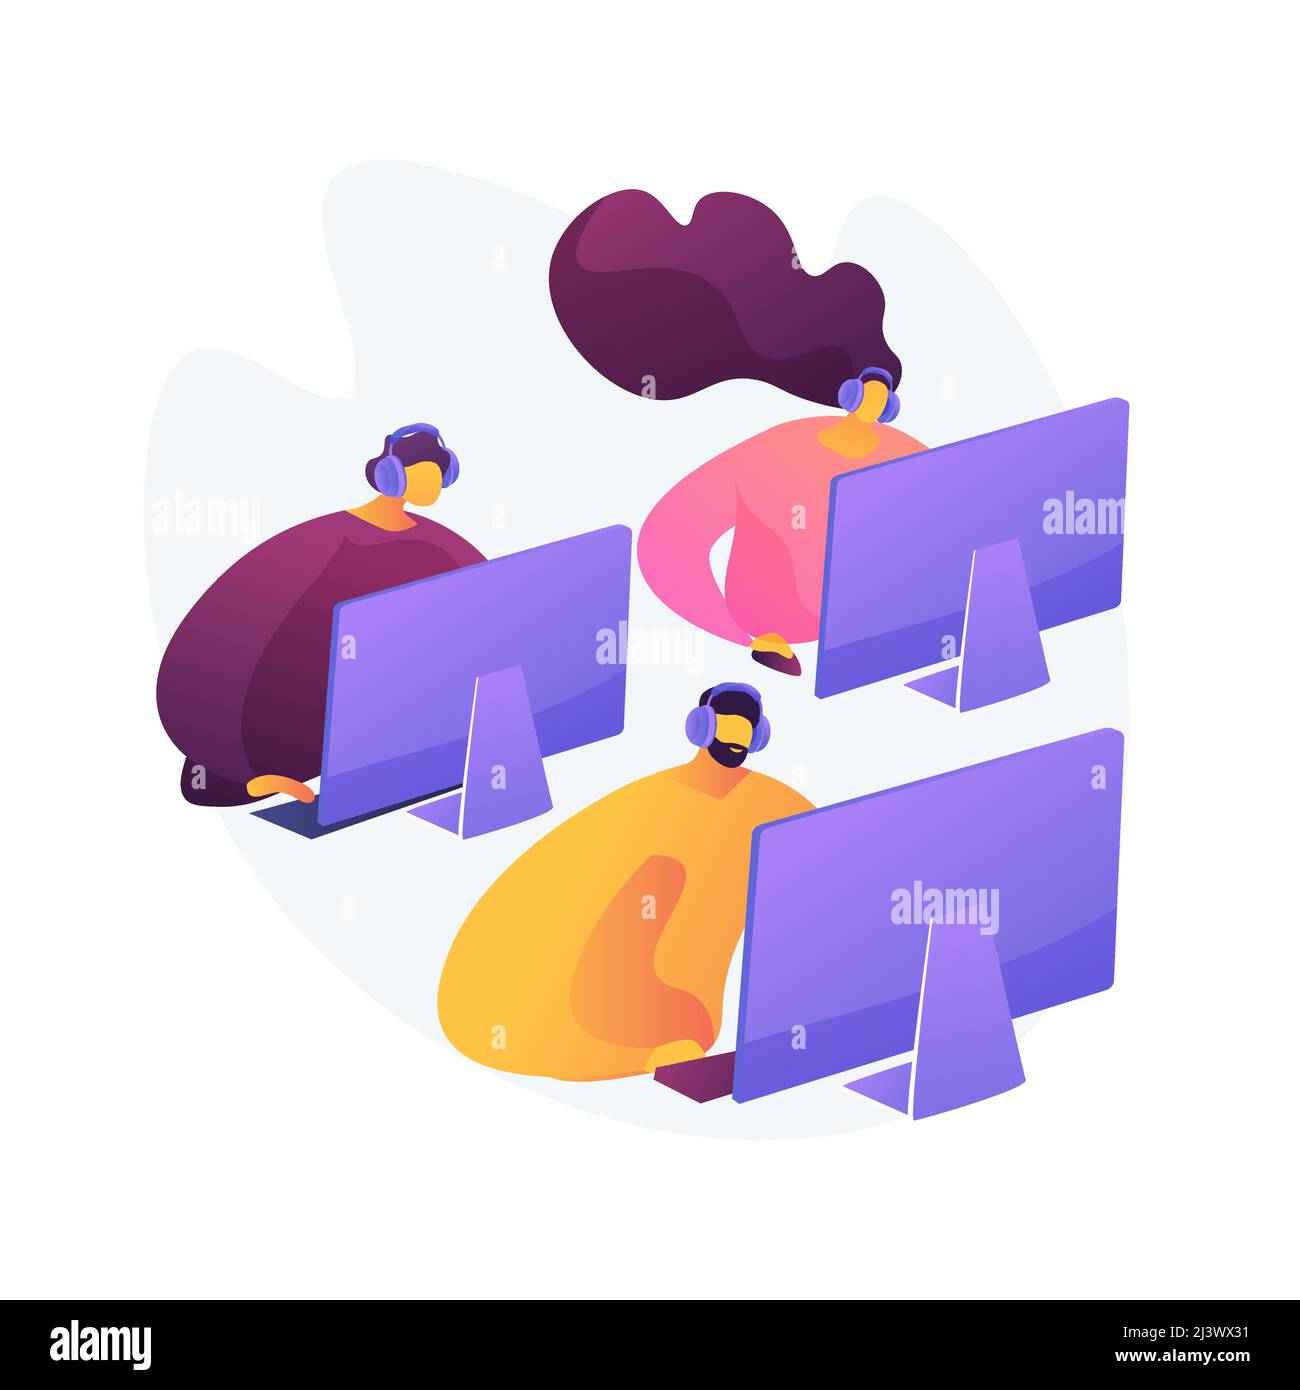 E-sport team abstract concept vector illustration. Group of e-sport gamers, pro team, online sport league, gaming championship, internet browser, play Stock Vector